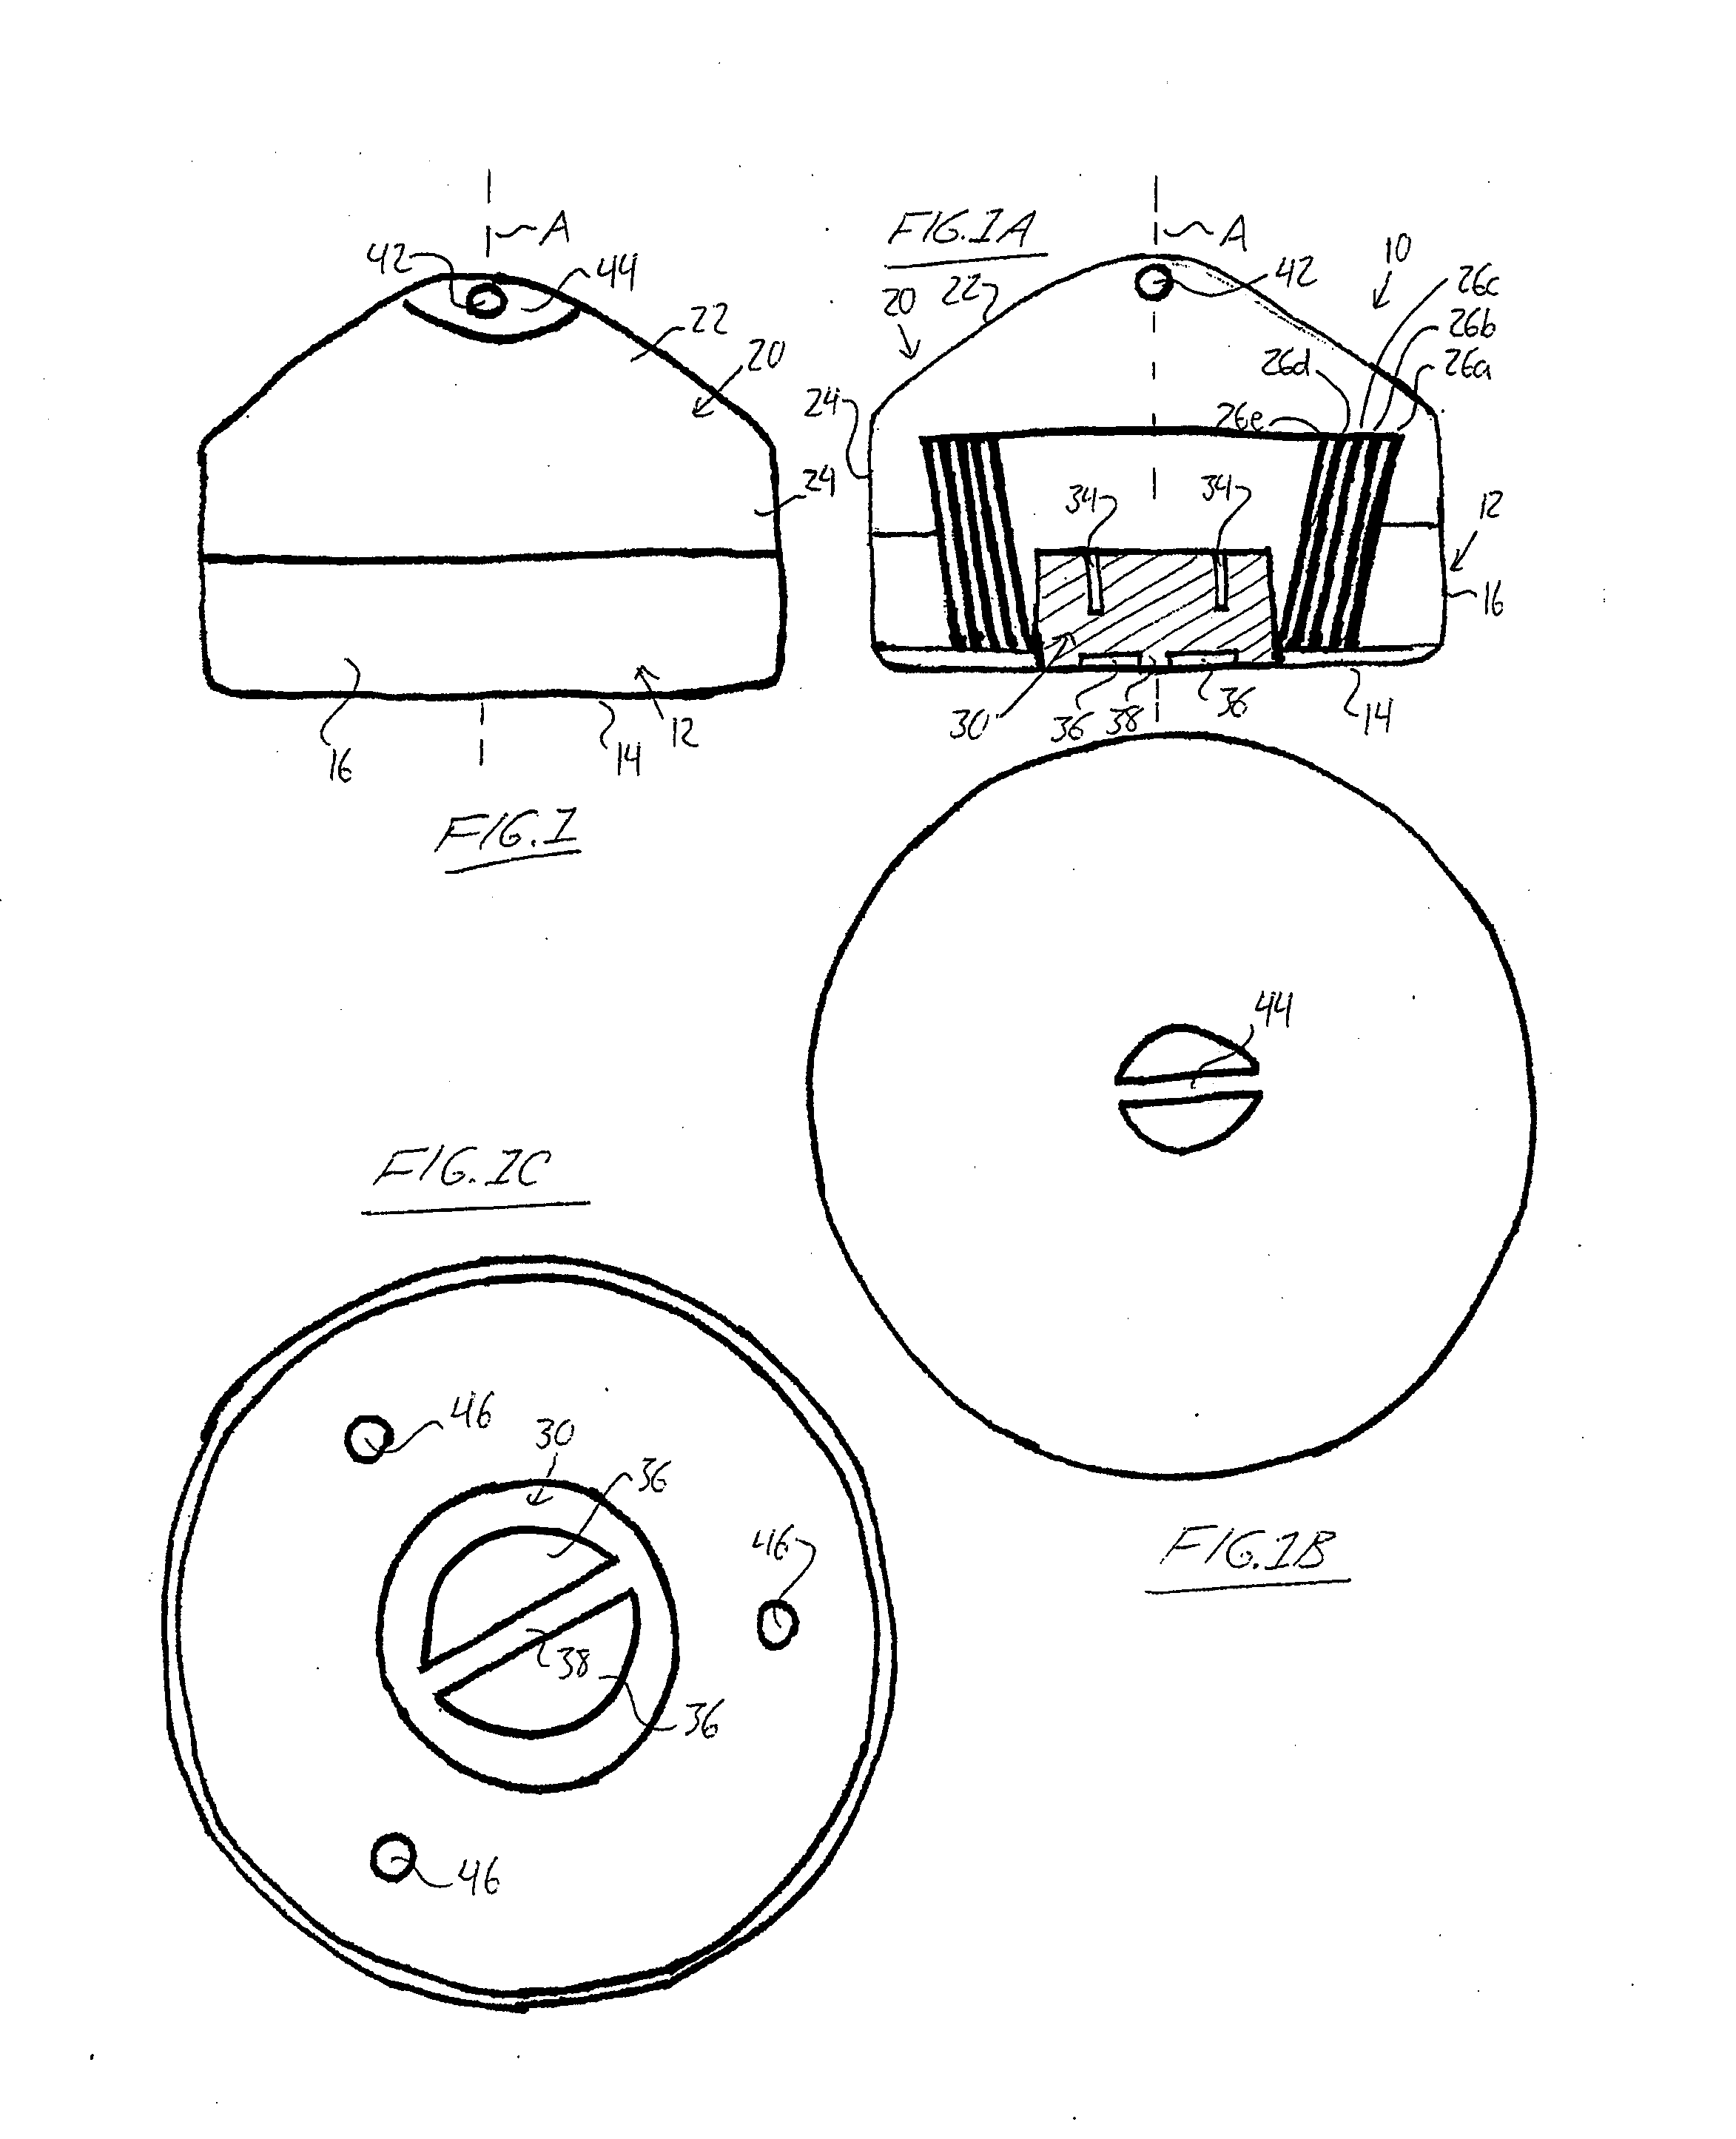 Scent Dispensing System with Enclosed Collapsible Scent Stick Holder and Tree Stand Delivery Features